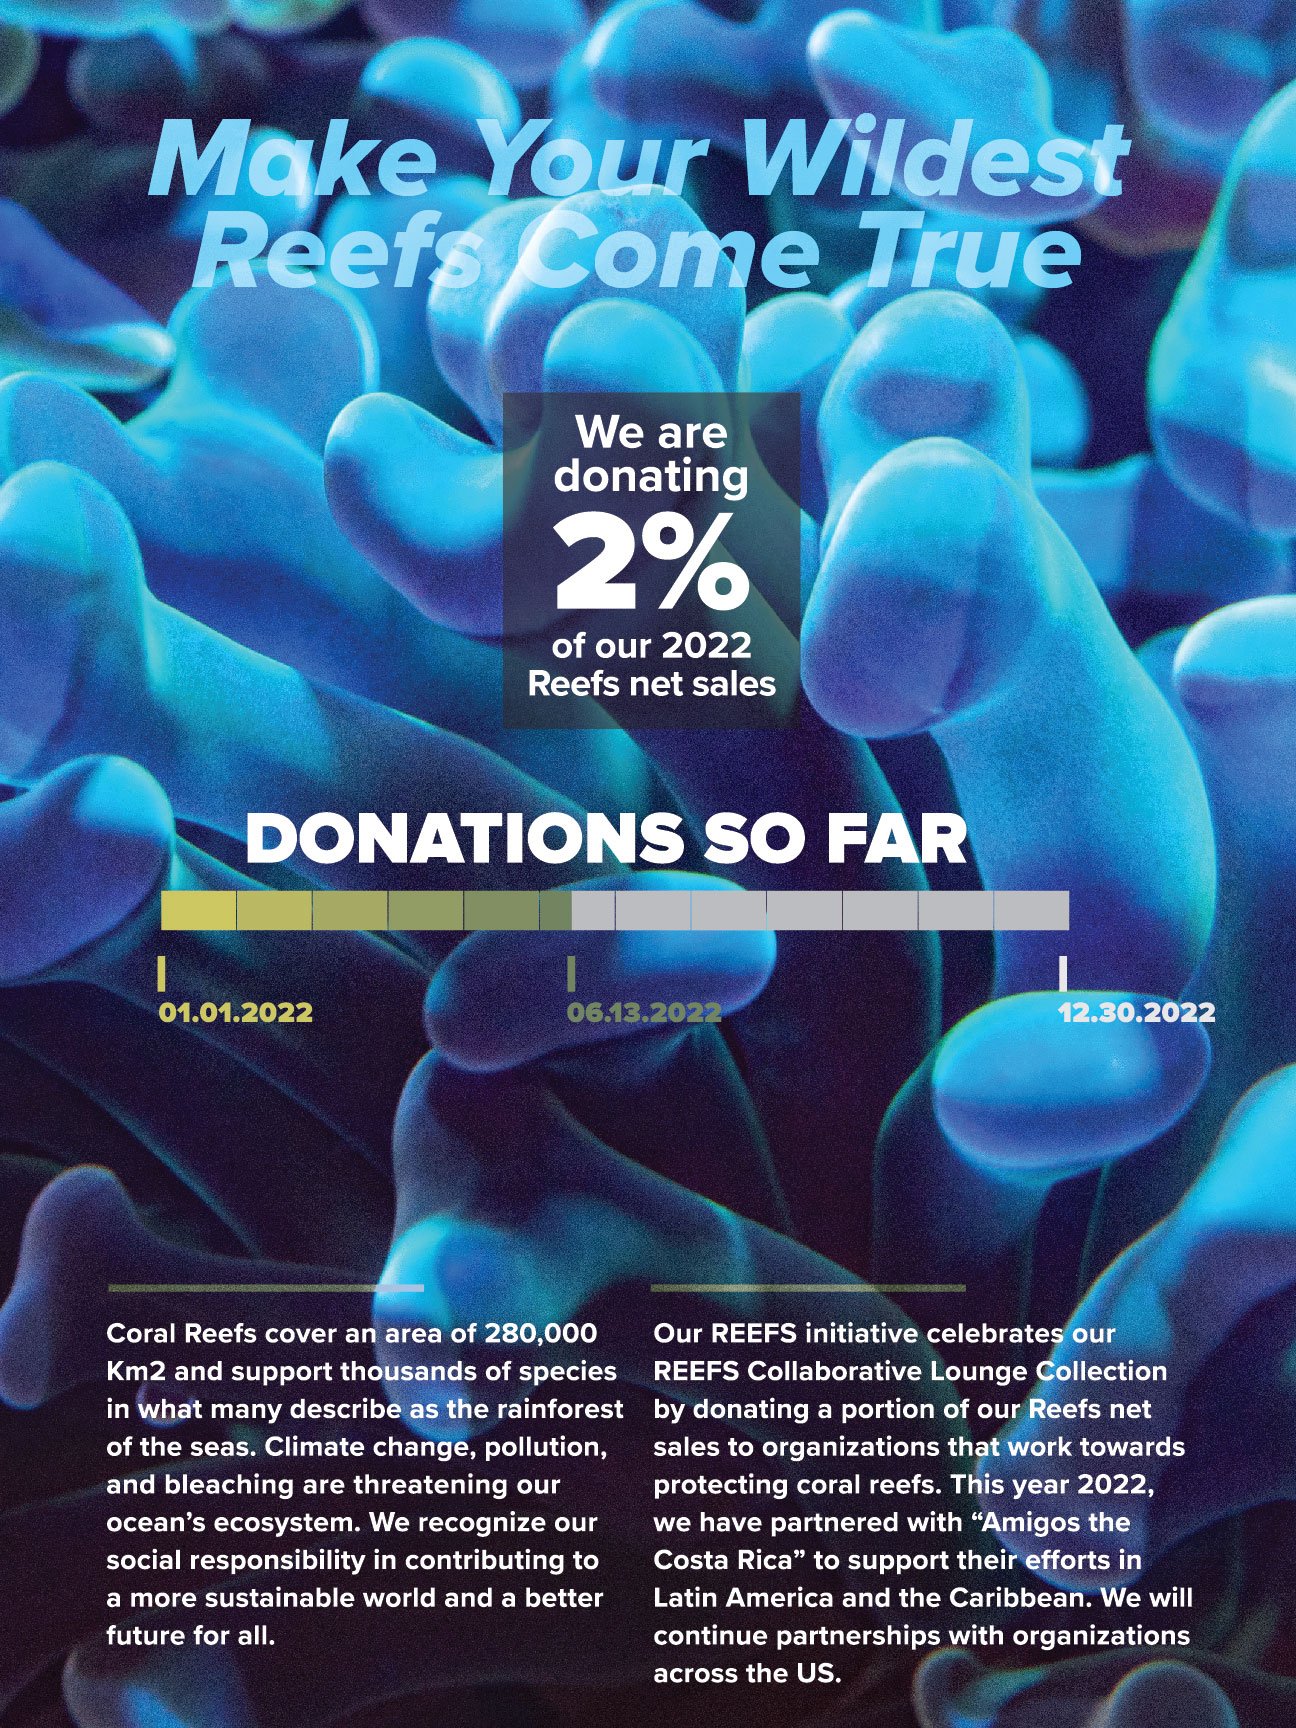 DHDG_ReefsInitiative_OnePager_18x24-01